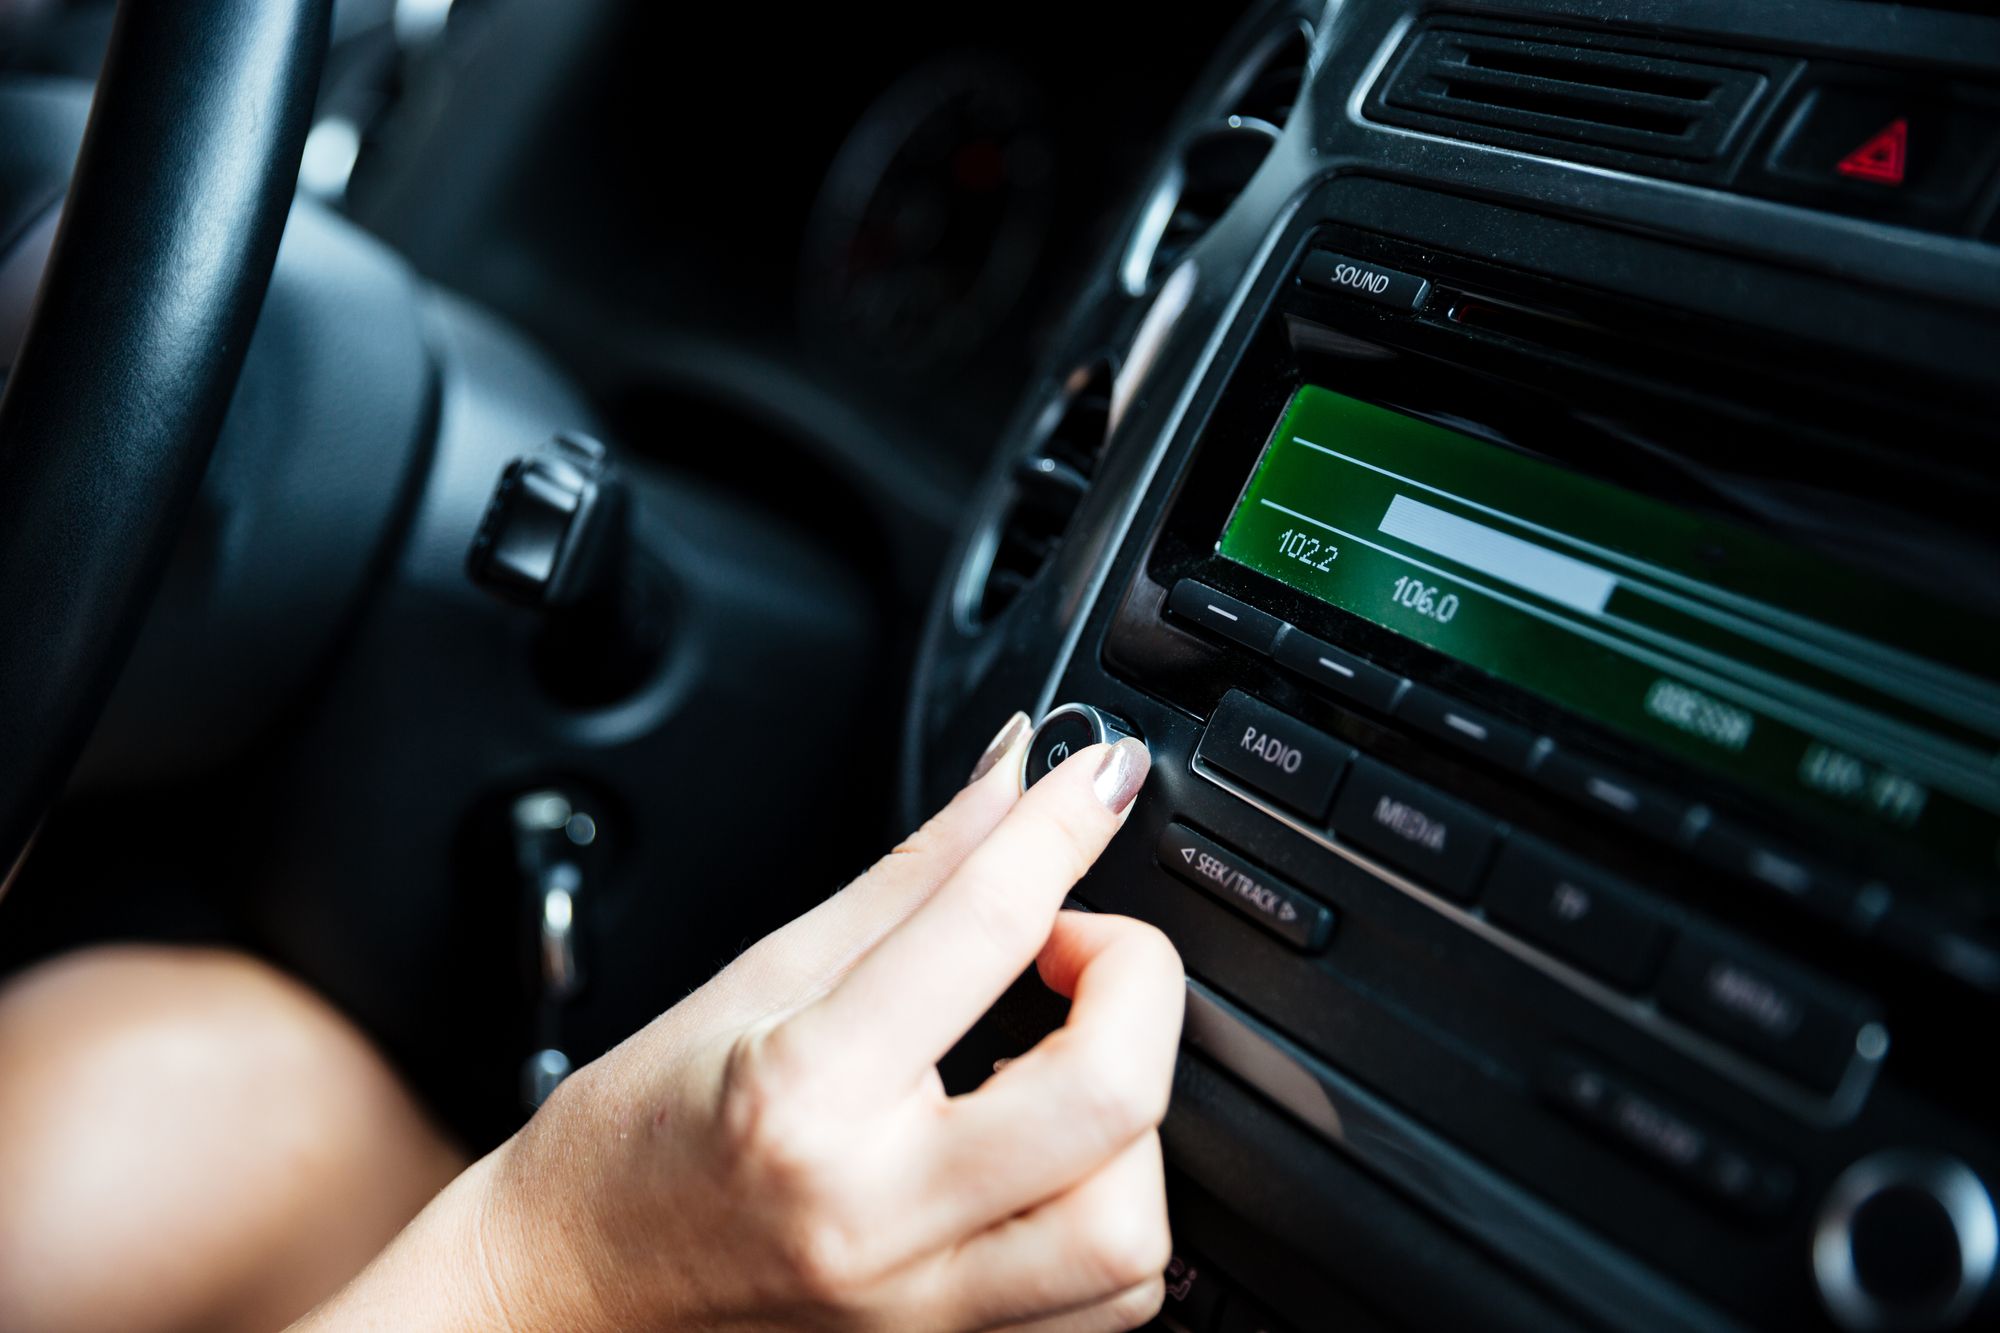 How To Listen To Internet Radio In Your Car